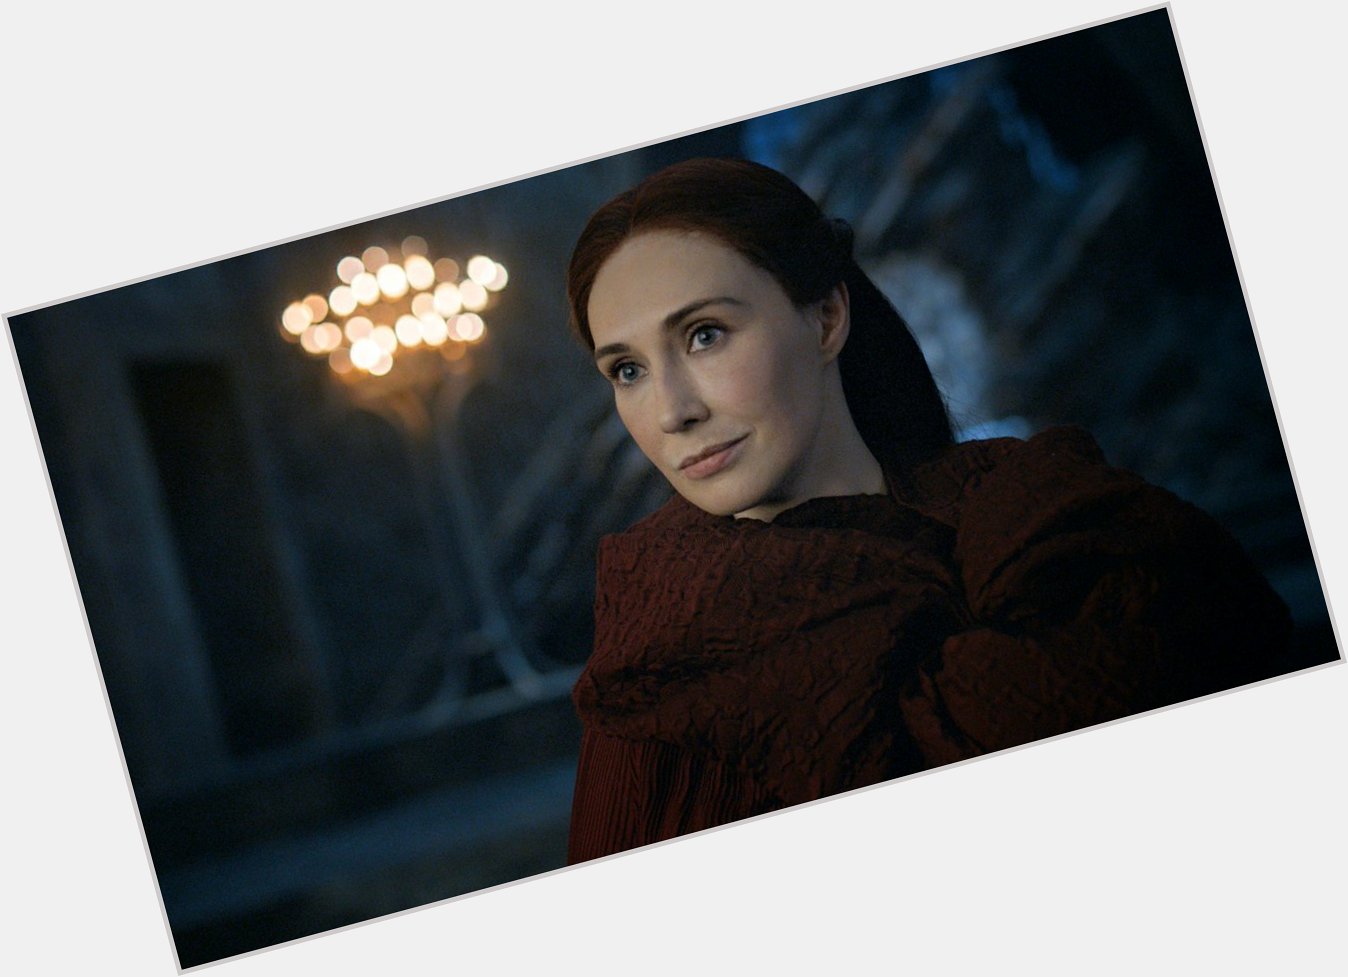 Happy 42nd birthday to Carice van Houten, the Red Woman! 